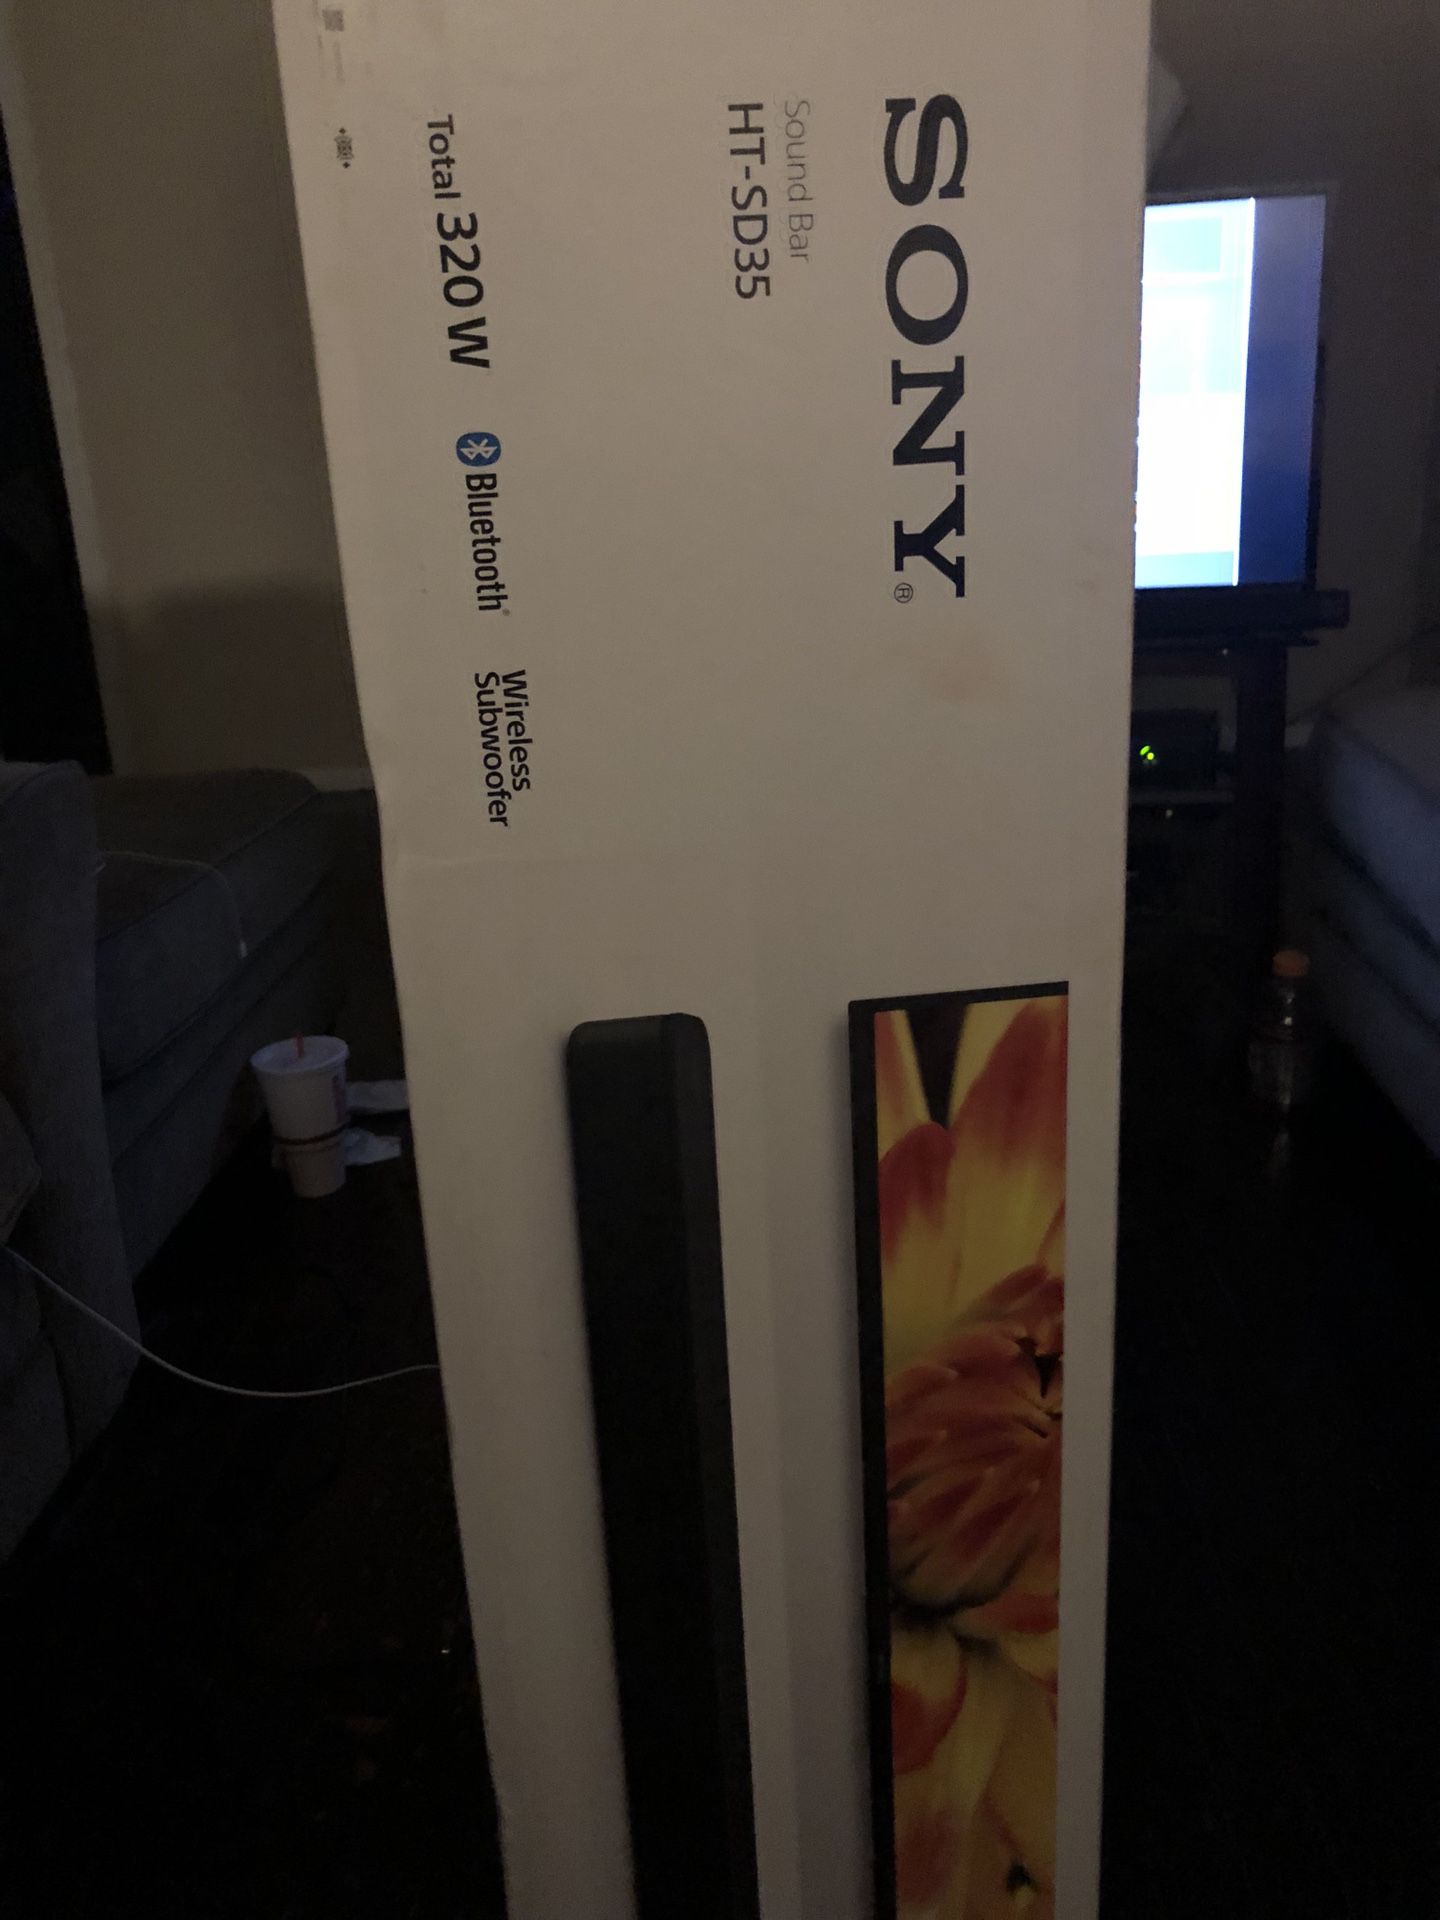 Sony HT-SD35 Bluetooth 2.1 Sound Bar with Wireless Subwoofer